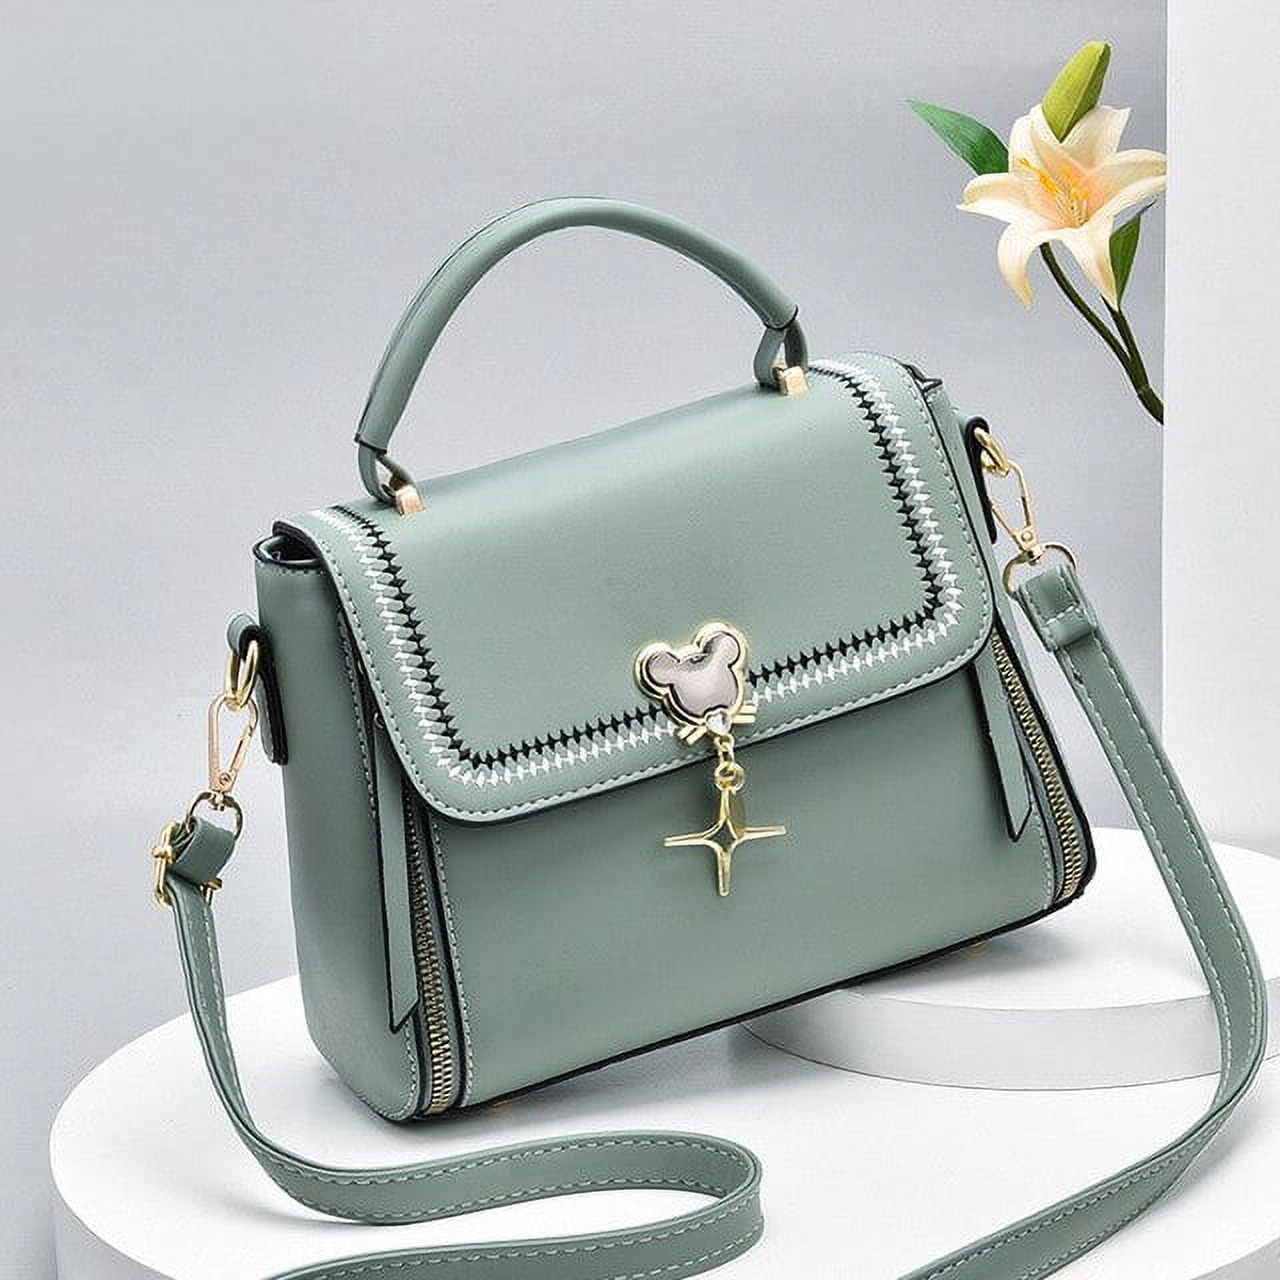 CoCopeaunt Exquisite Woman High Quality Bags New Fashion Solid Color  Handbag Cute Sweet Bag Shoulder Crossbody Bag Small Classic Square Bag